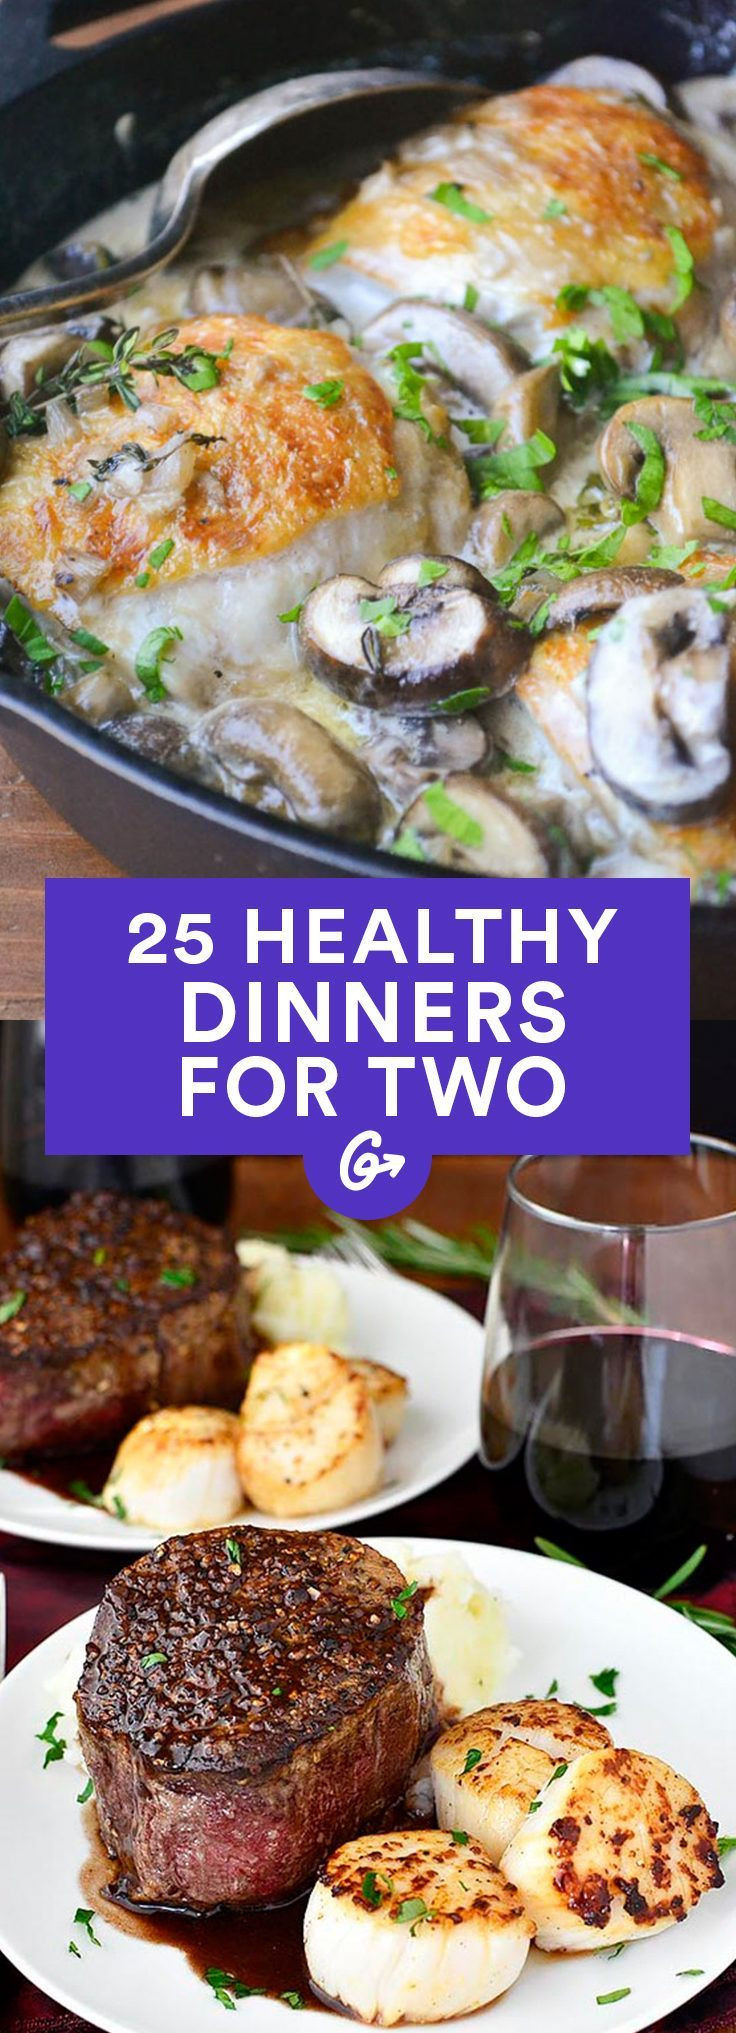 Easy Dinners For Two Healthy
 25 Healthy Dinner Recipes for Two